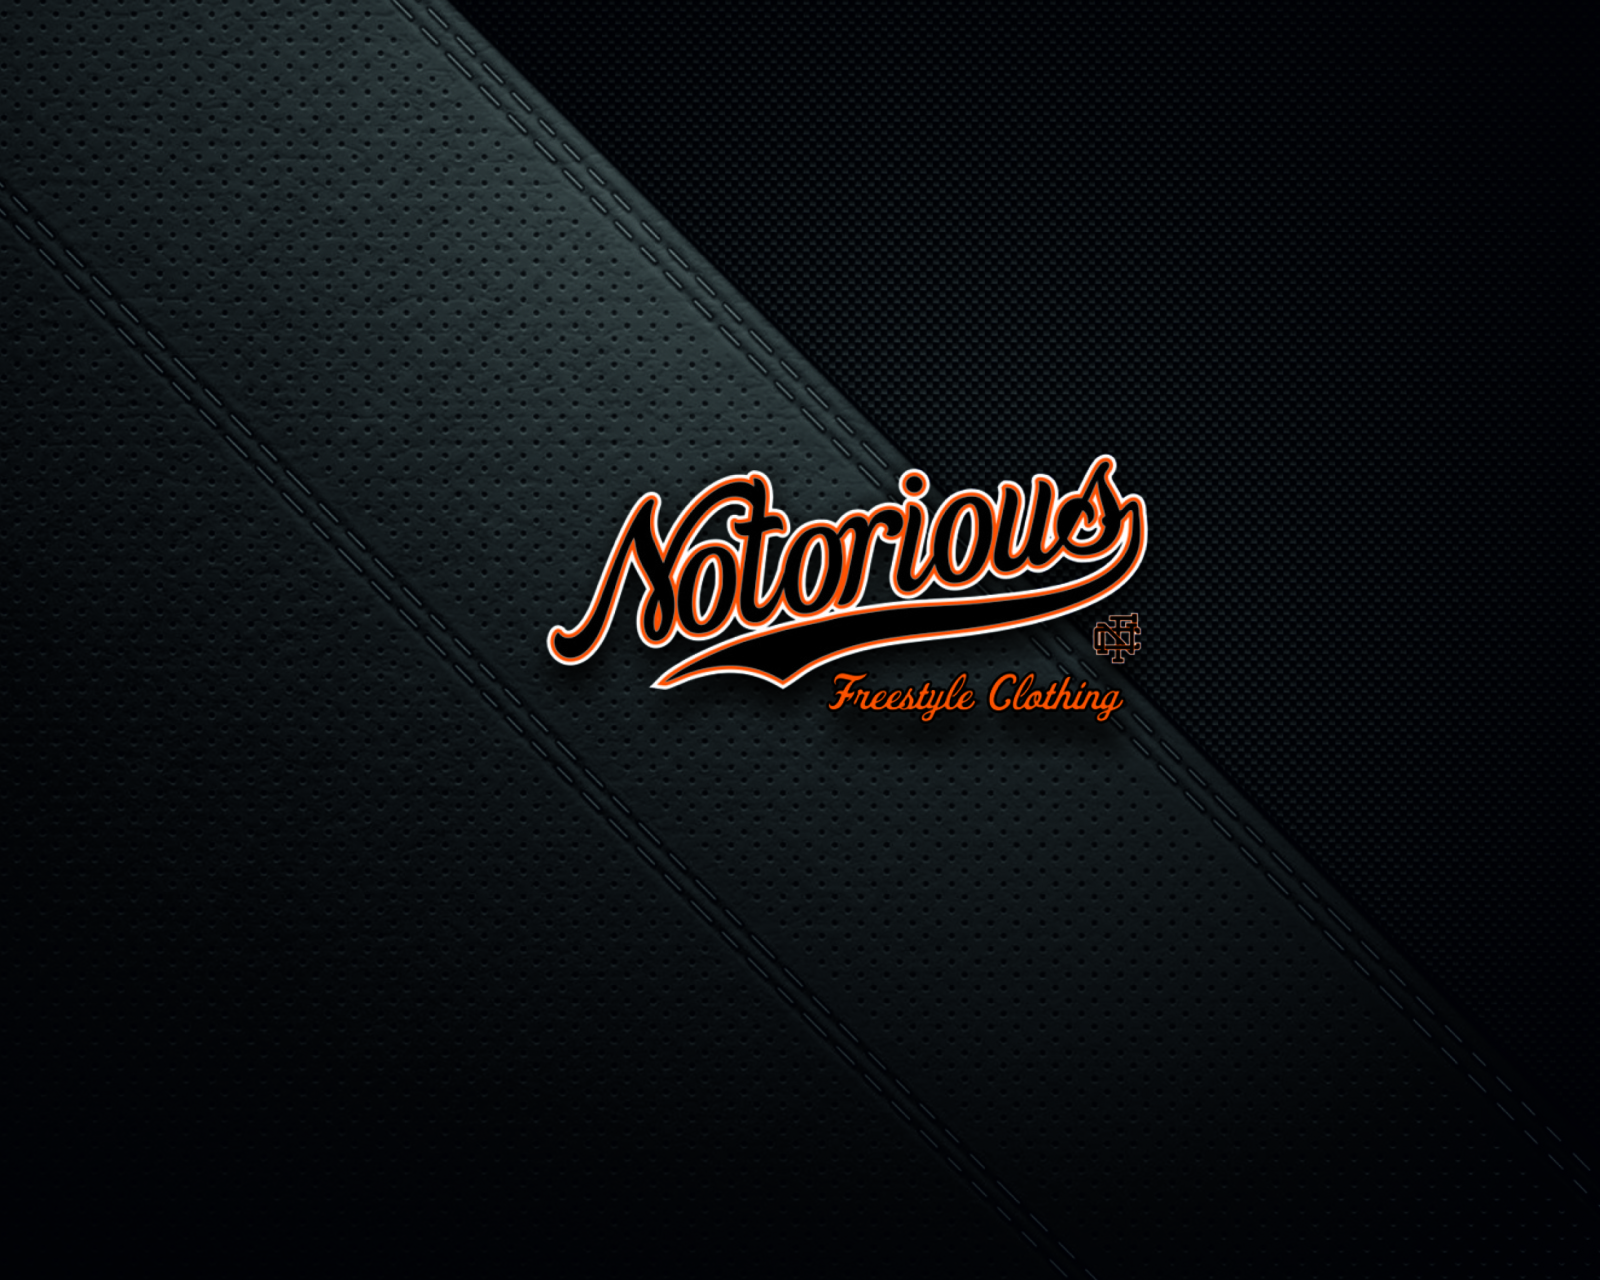 Notorious Freestyle Clothes wallpaper 1600x1280